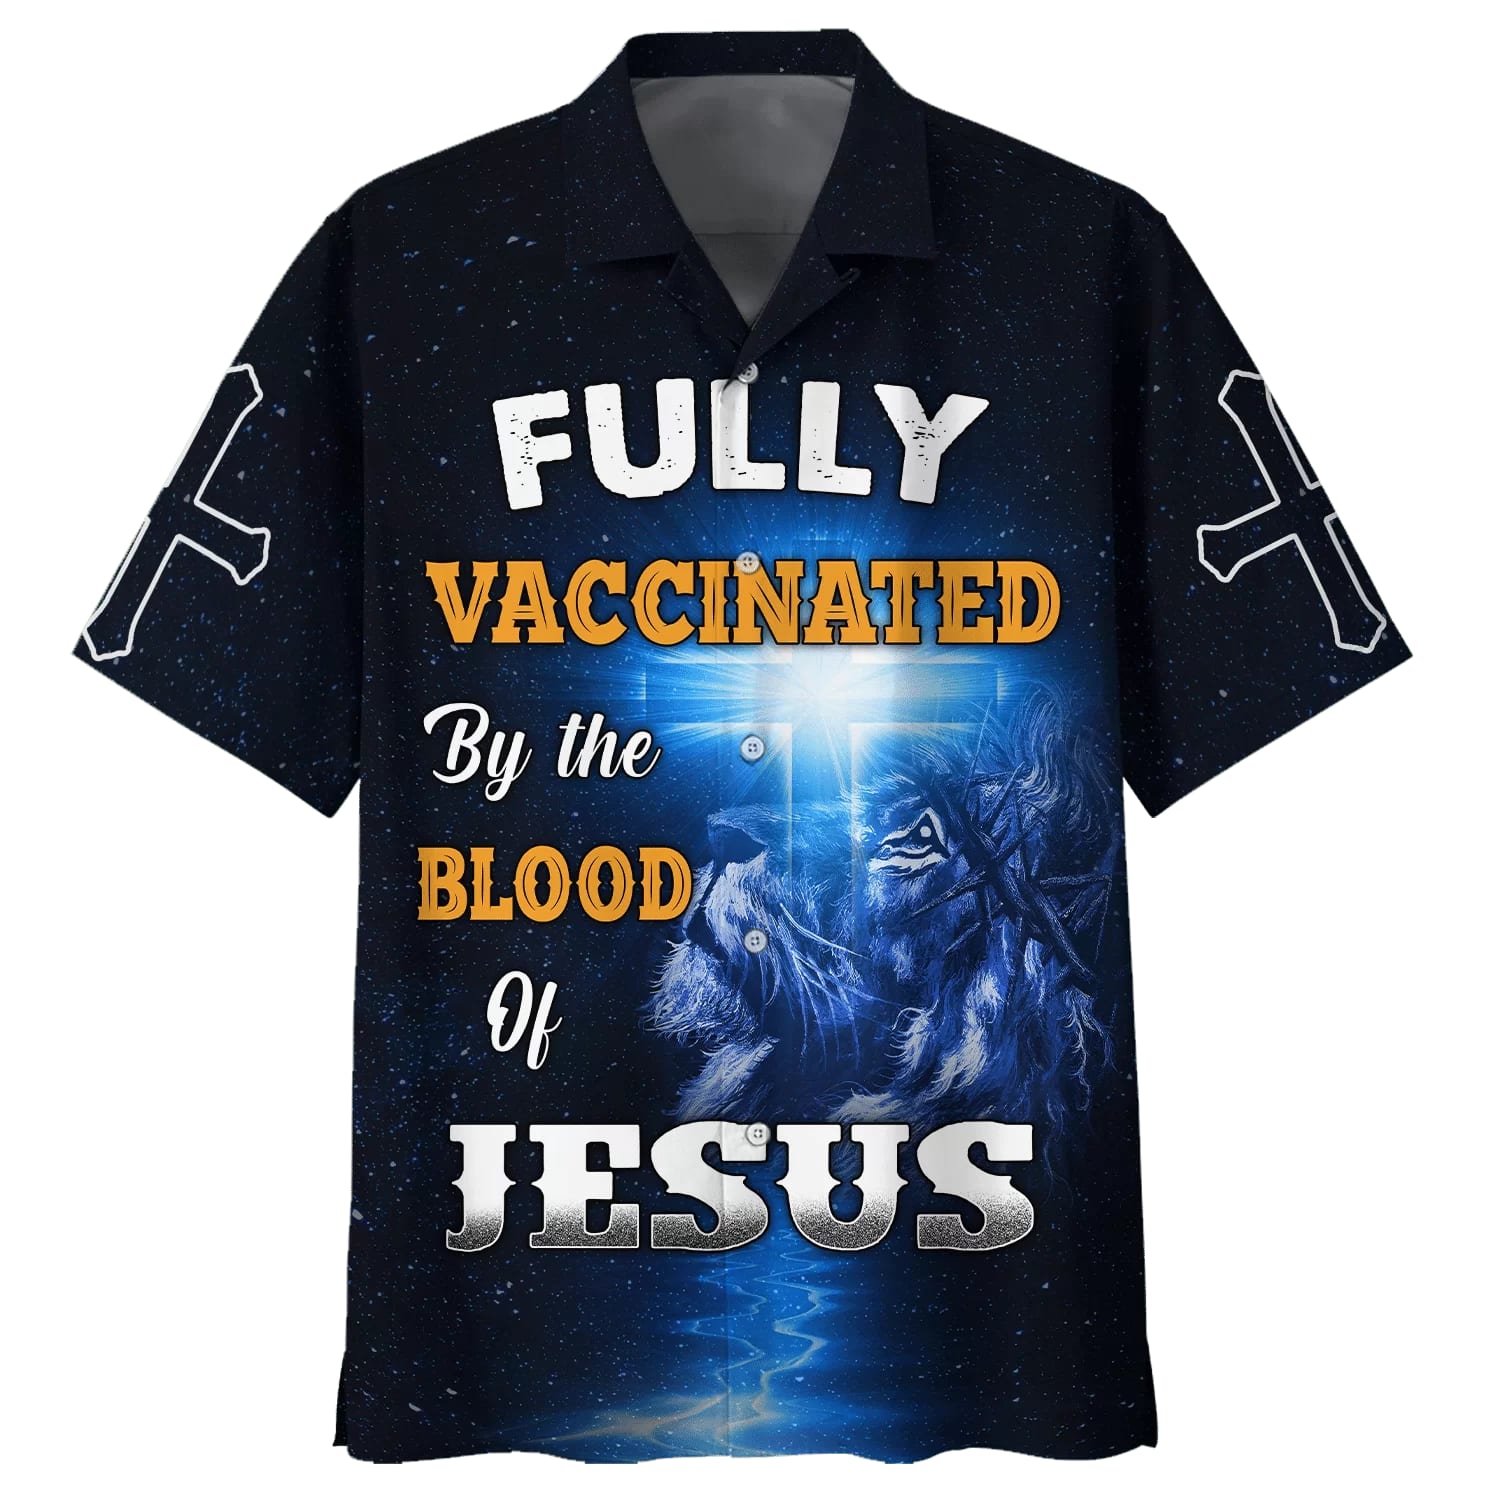 Fully Vaccinates By The Blood Of Jesus Hawaiian Shirts - Christian Hawaiian Shirt - Jesus Hawaiian Shirts